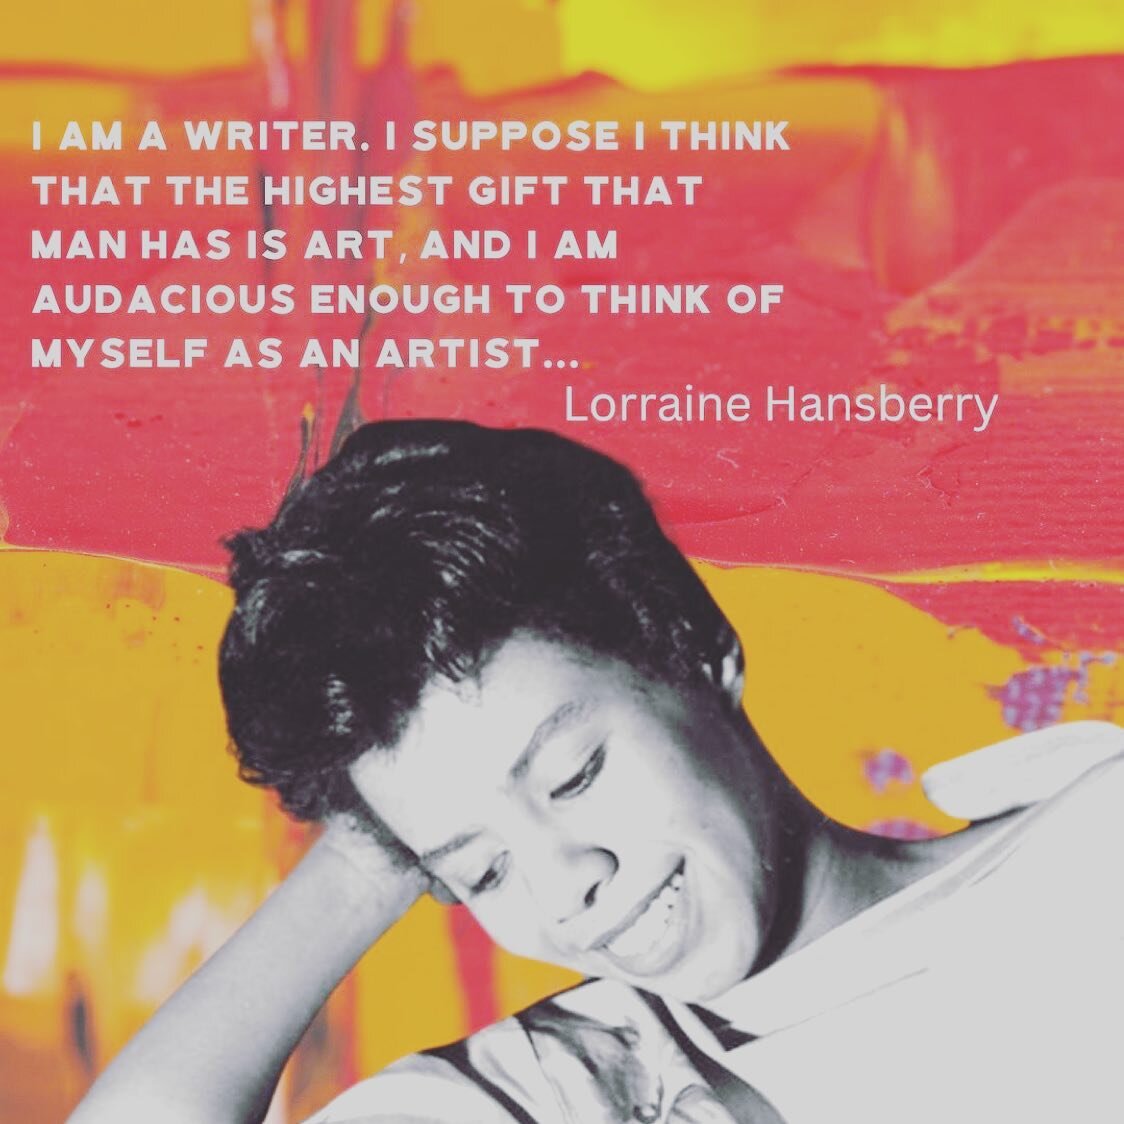 Repost from @hurstonwrightfoundation
&bull;
Lorraine Hansberry was the first Black playwright and the youngest American to win a New York Critics&rsquo; Circle award. Throughout her life she was heavily involved in civil rights. She died at 34 of pan